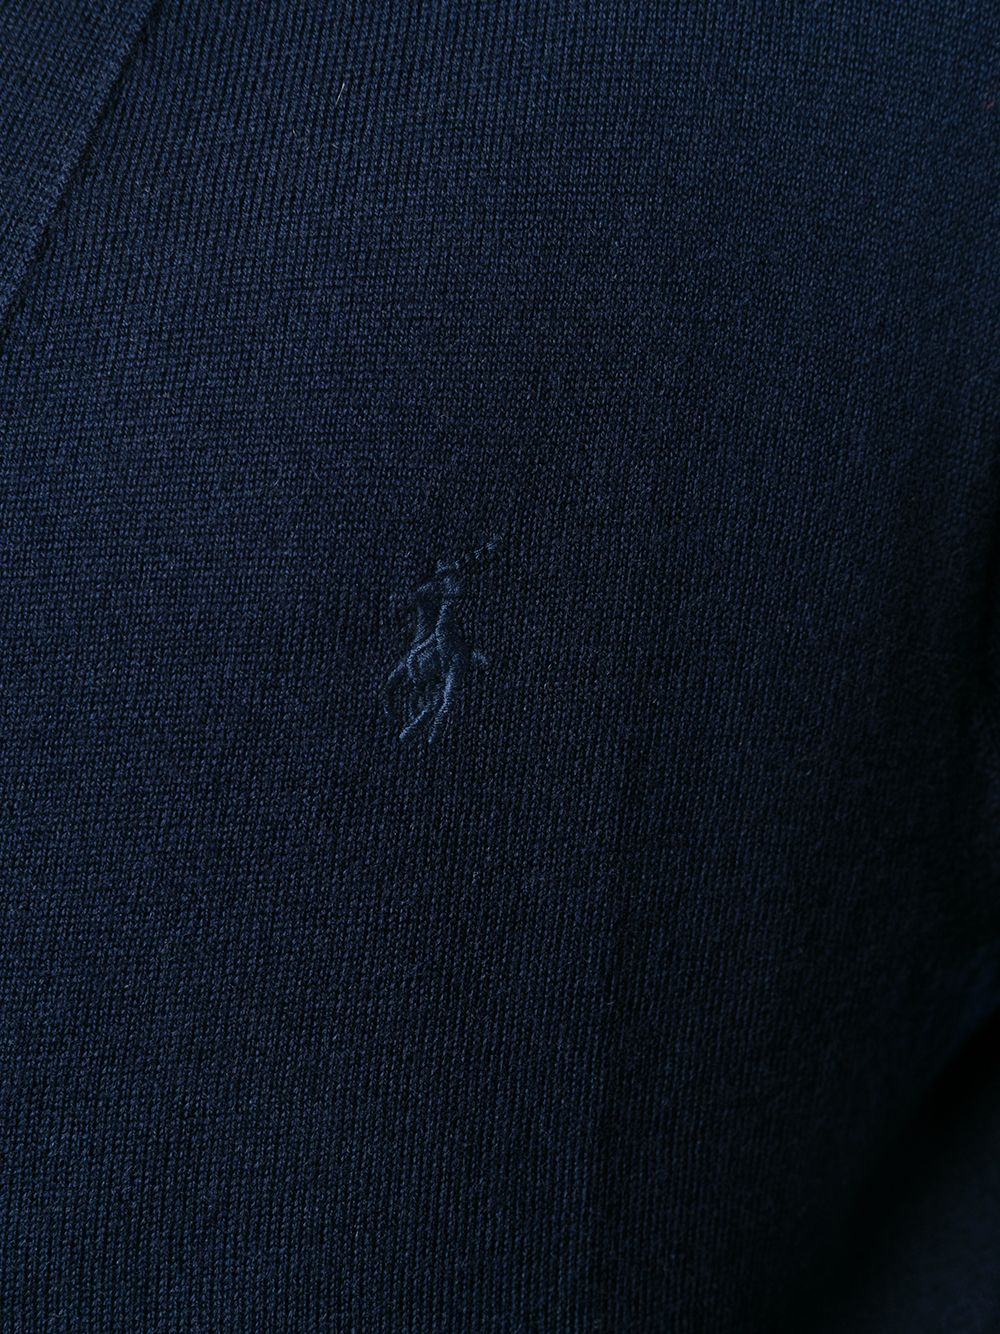 Shop Polo Ralph Lauren plain cardigan with Express Delivery - FARFETCH